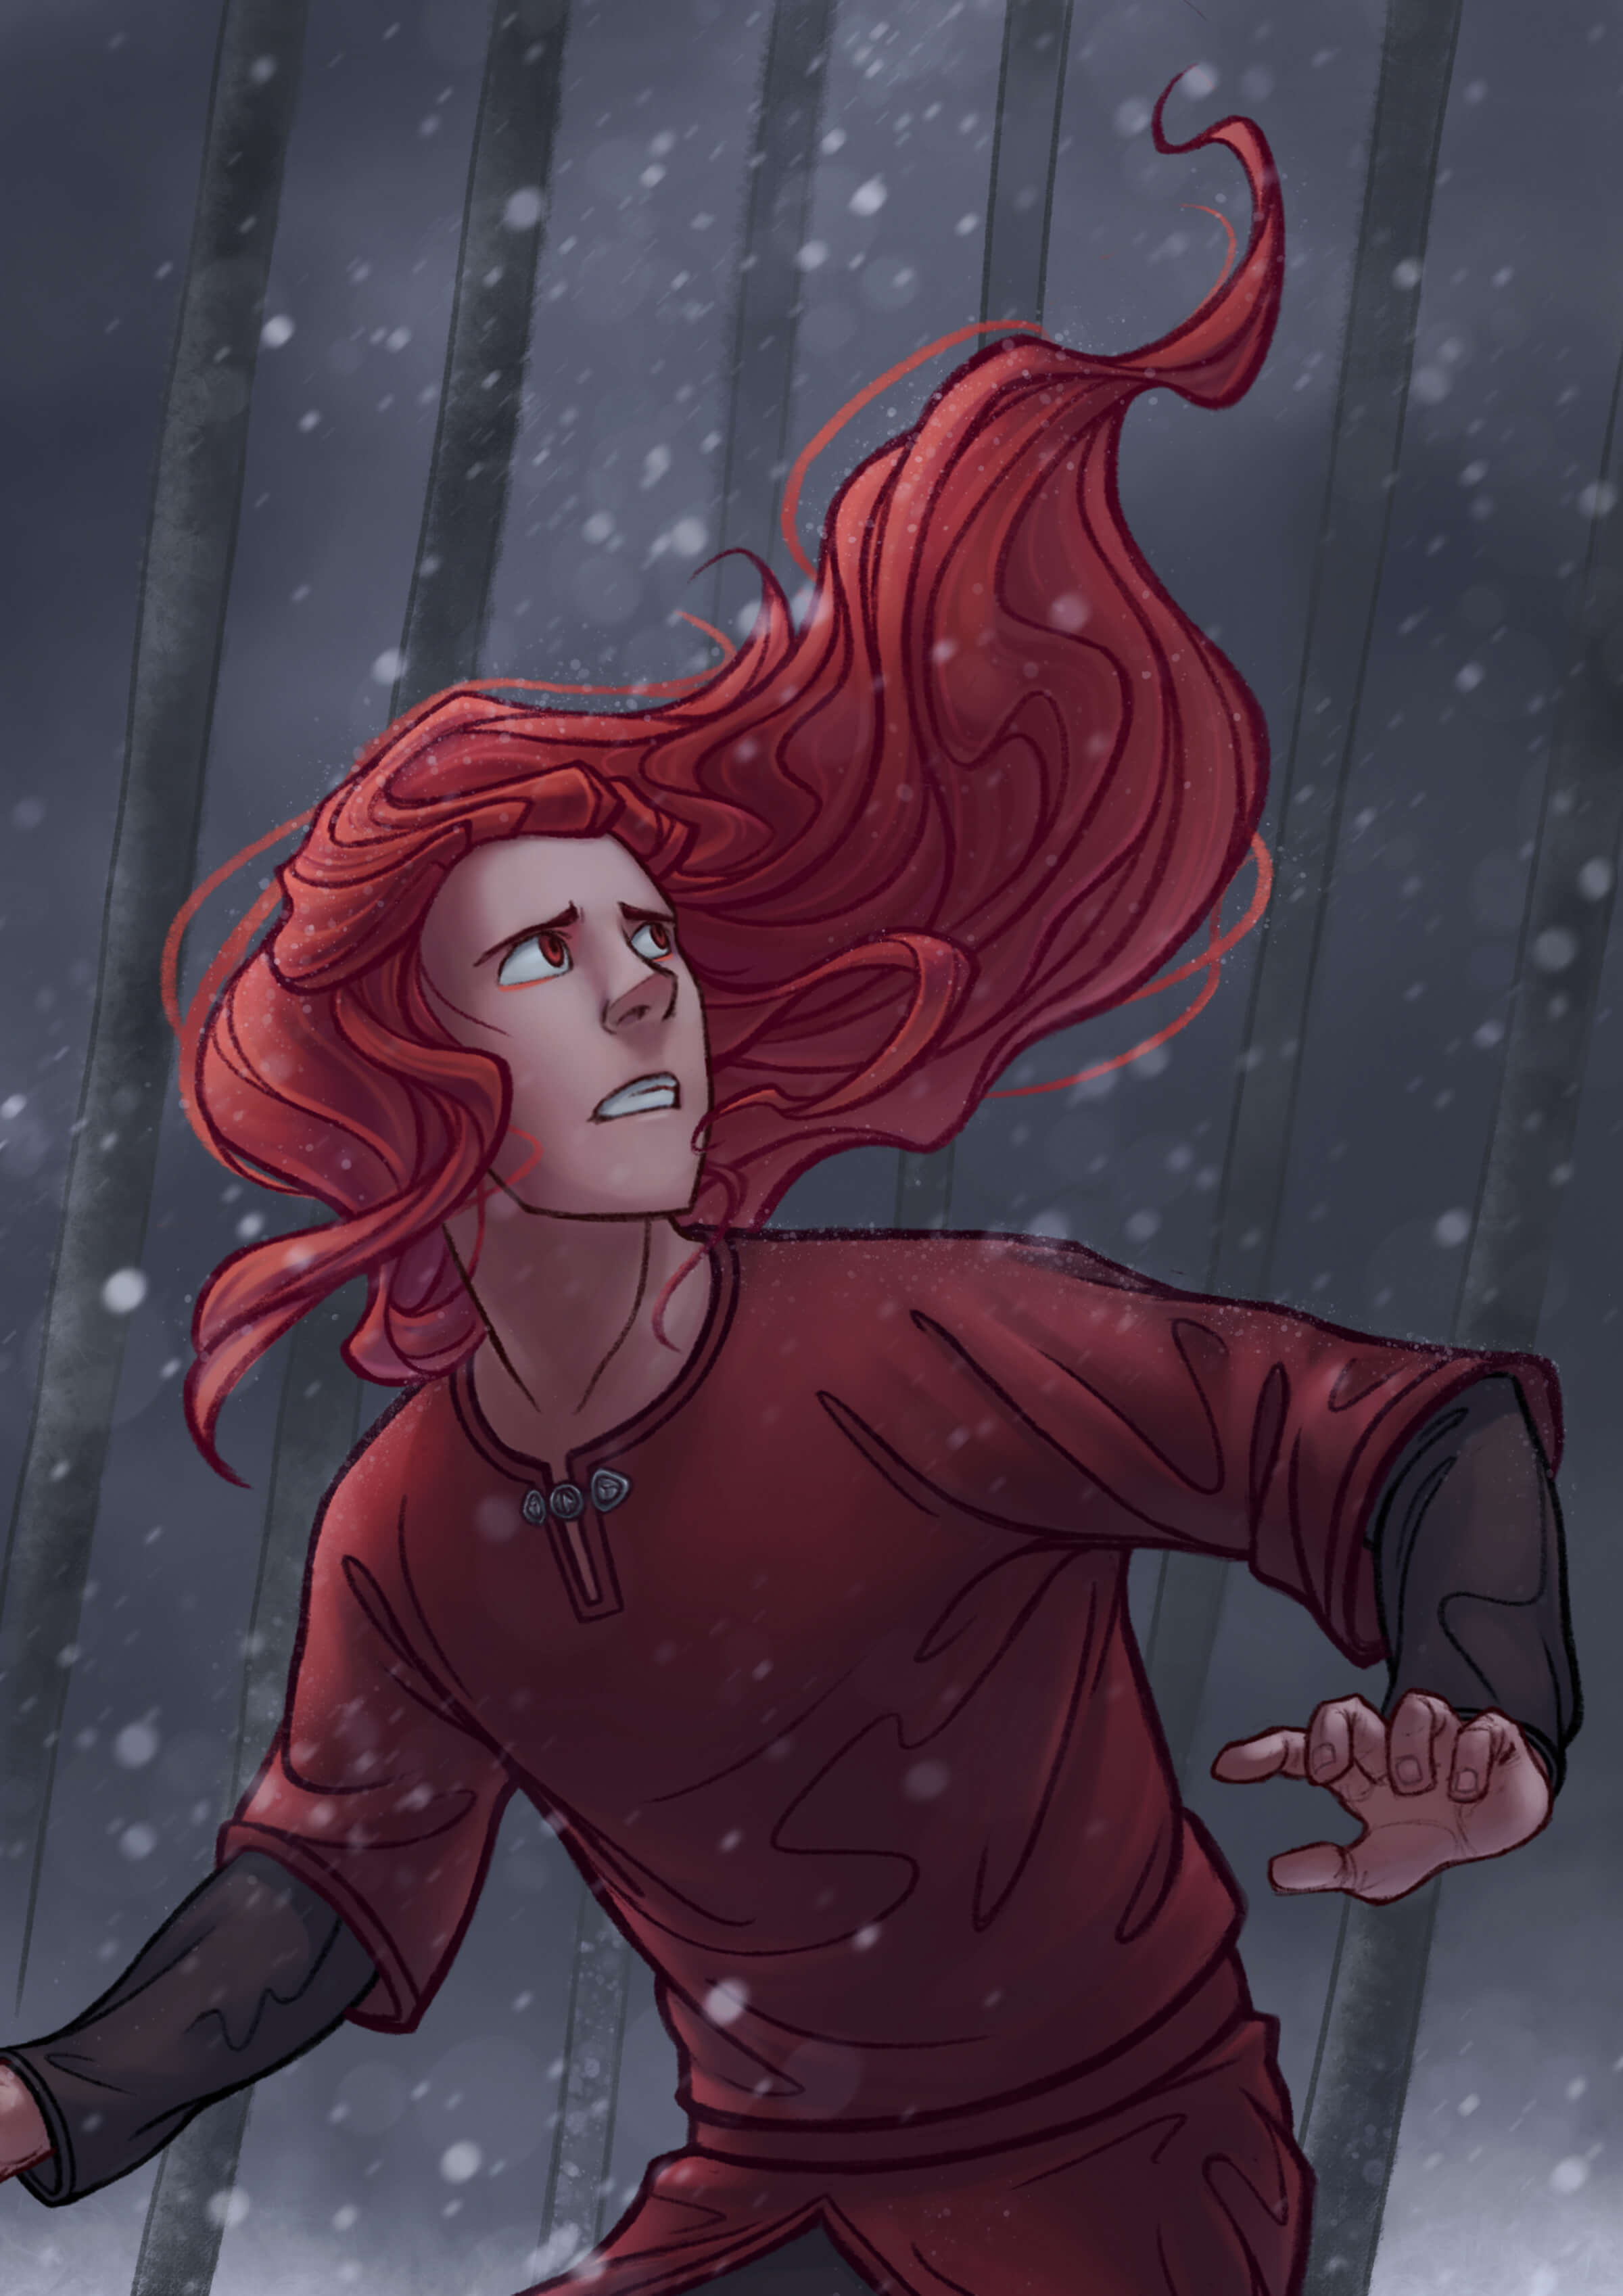 A man with long red hair in a red tunic looks worriedly over his shoulder in a snowy environment.